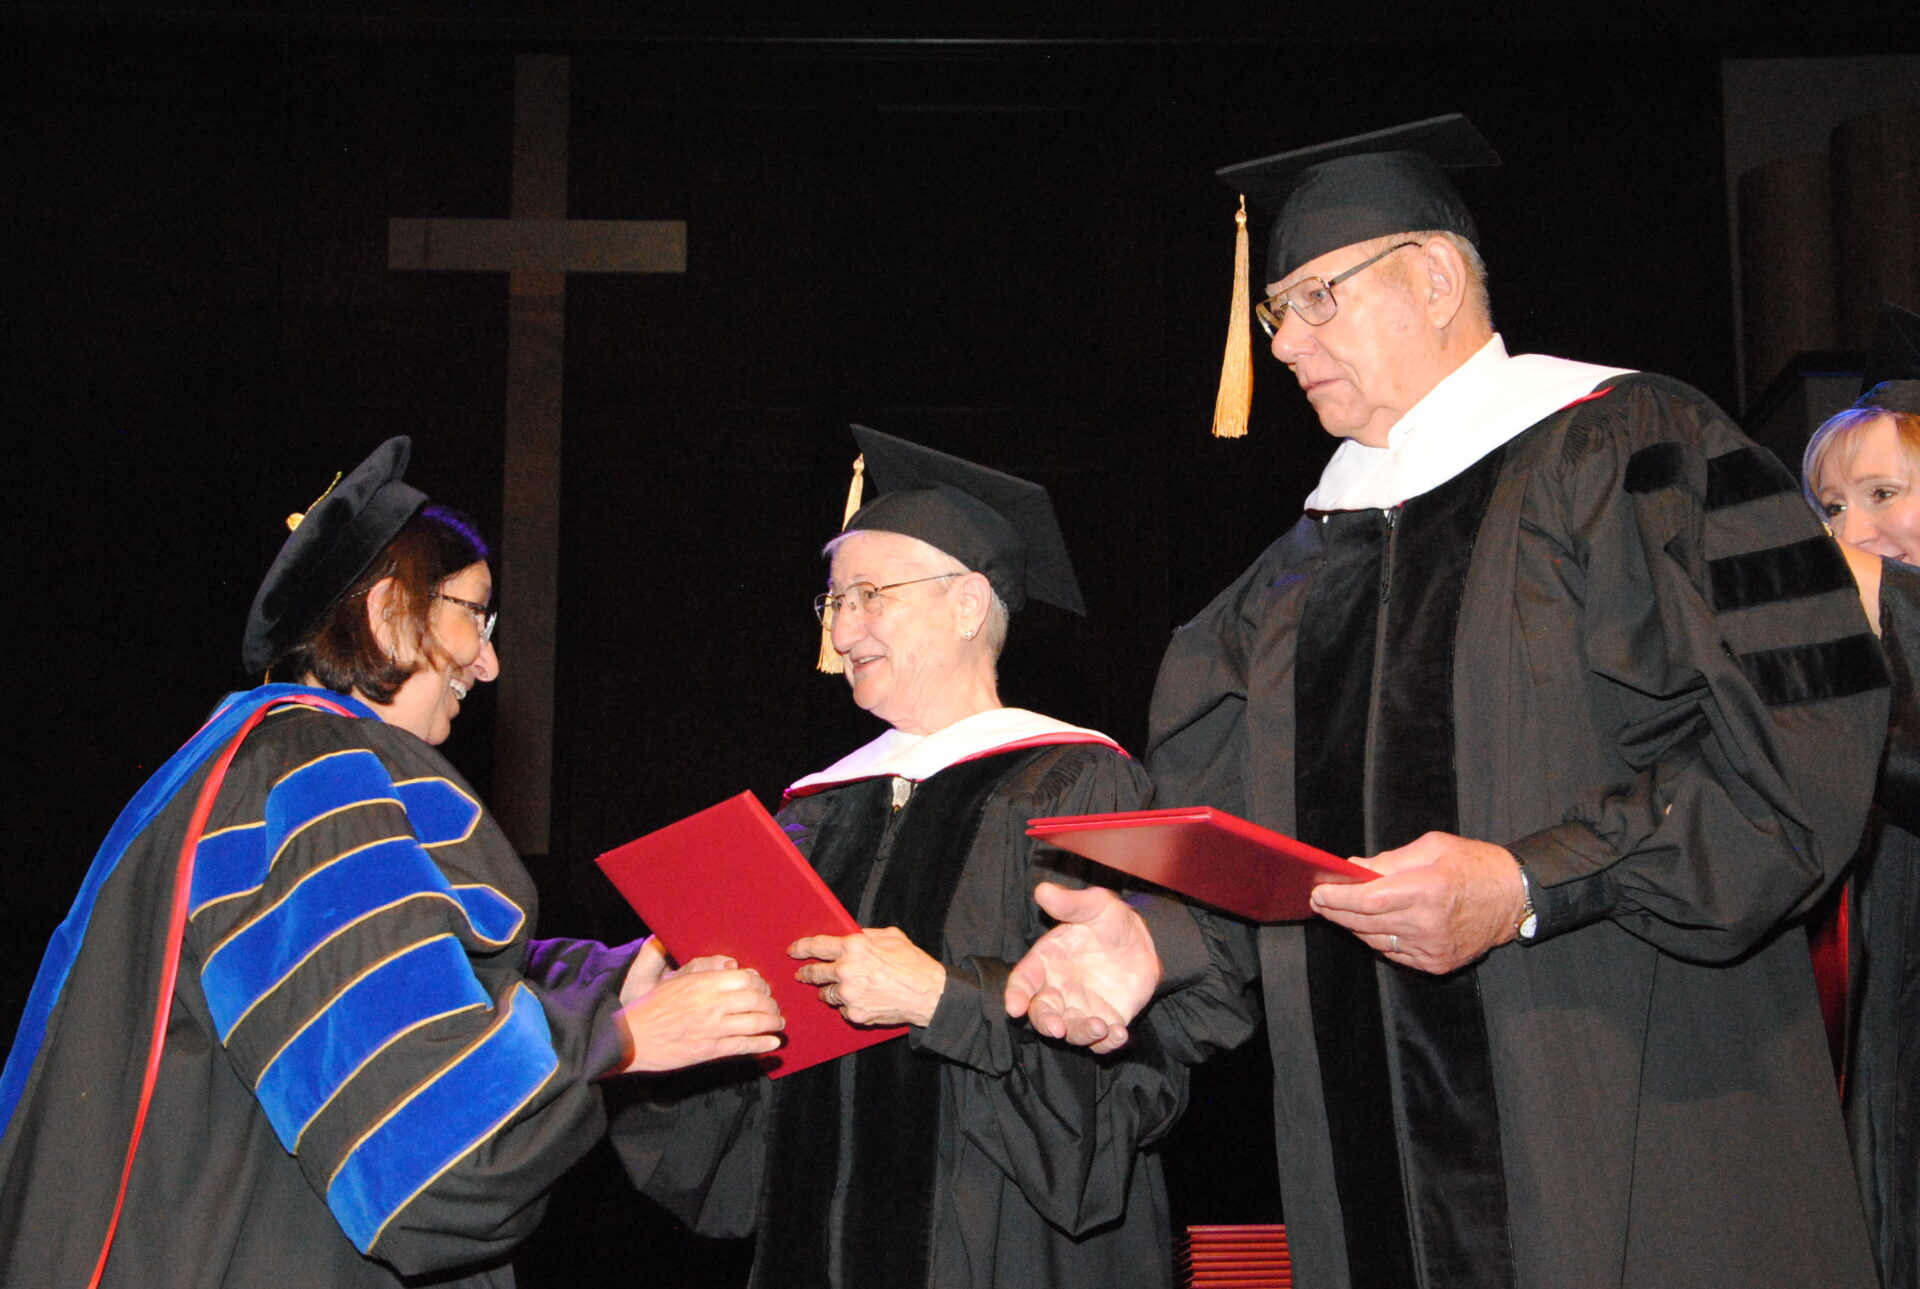 Newman President Noreen M. Carrocci, Ph.D. presents Doctor of Letters, honoris causa to Rosalie and Robert Goebel.